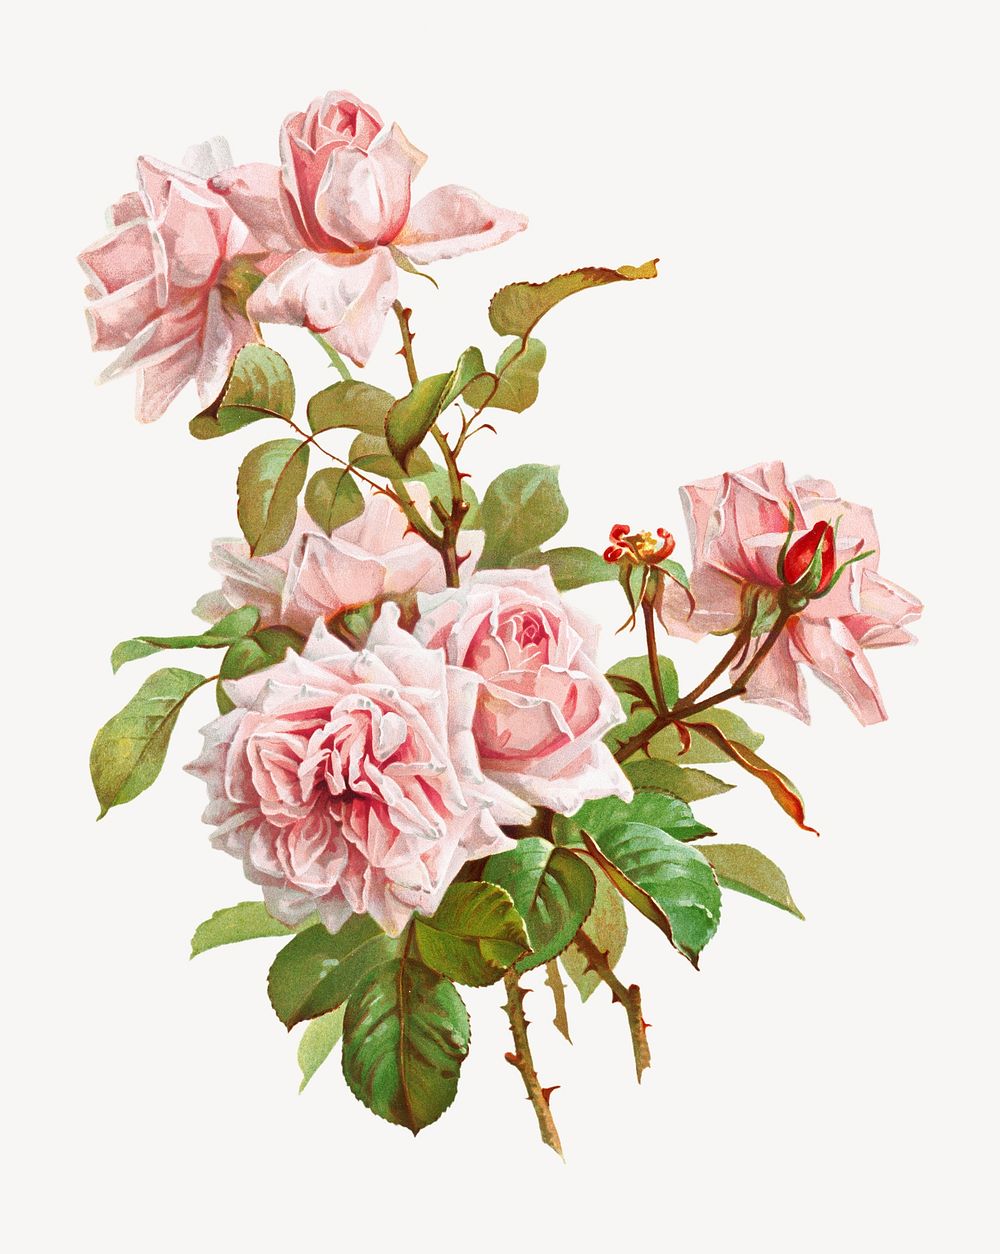 Pink roses; La France roses, vintage flower illustration by J. Bleischwitz. Remixed by rawpixel.